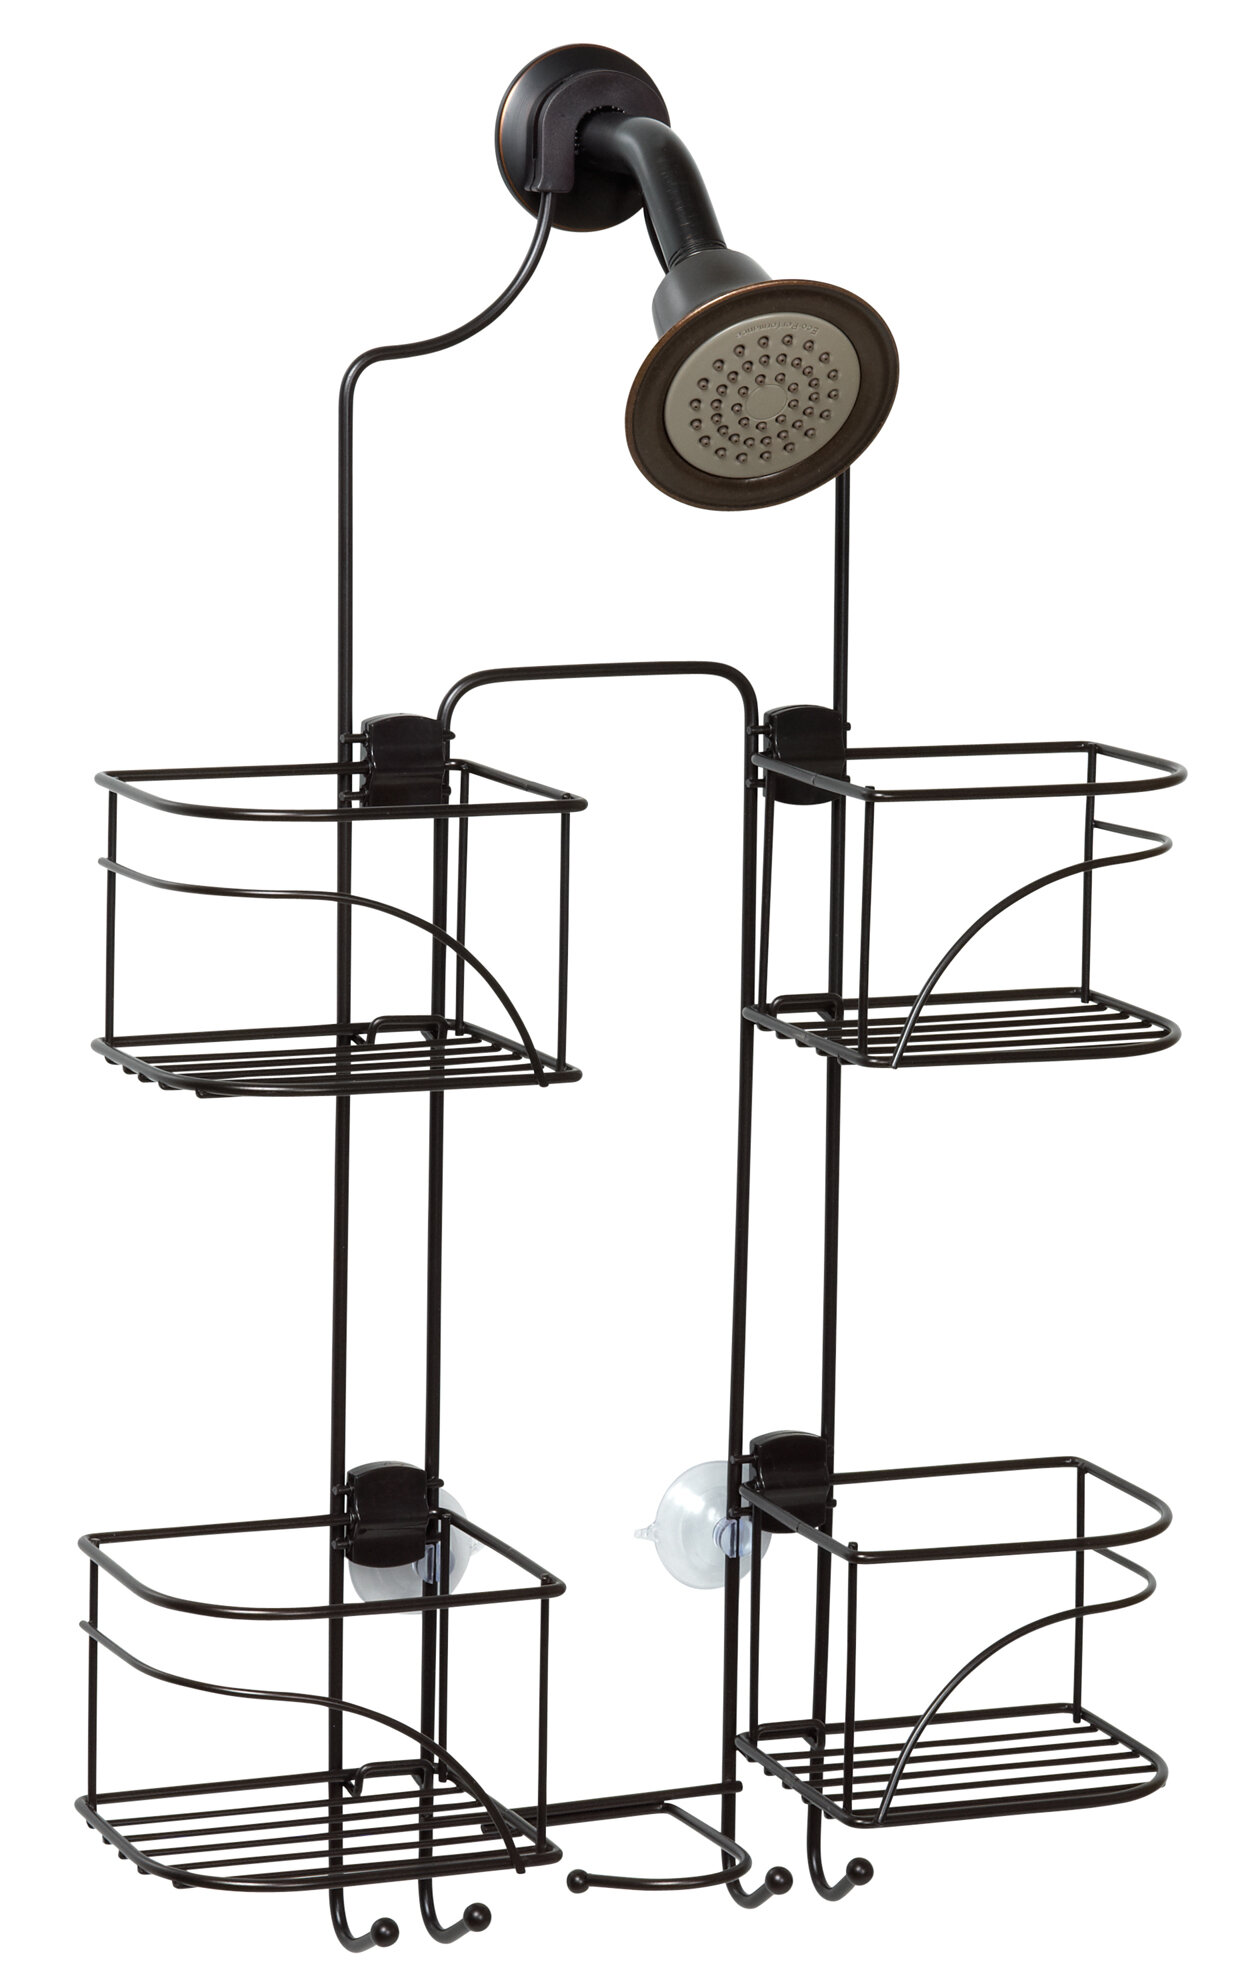 Rebrilliant Stiefel Hanging Shower Caddy & Reviews